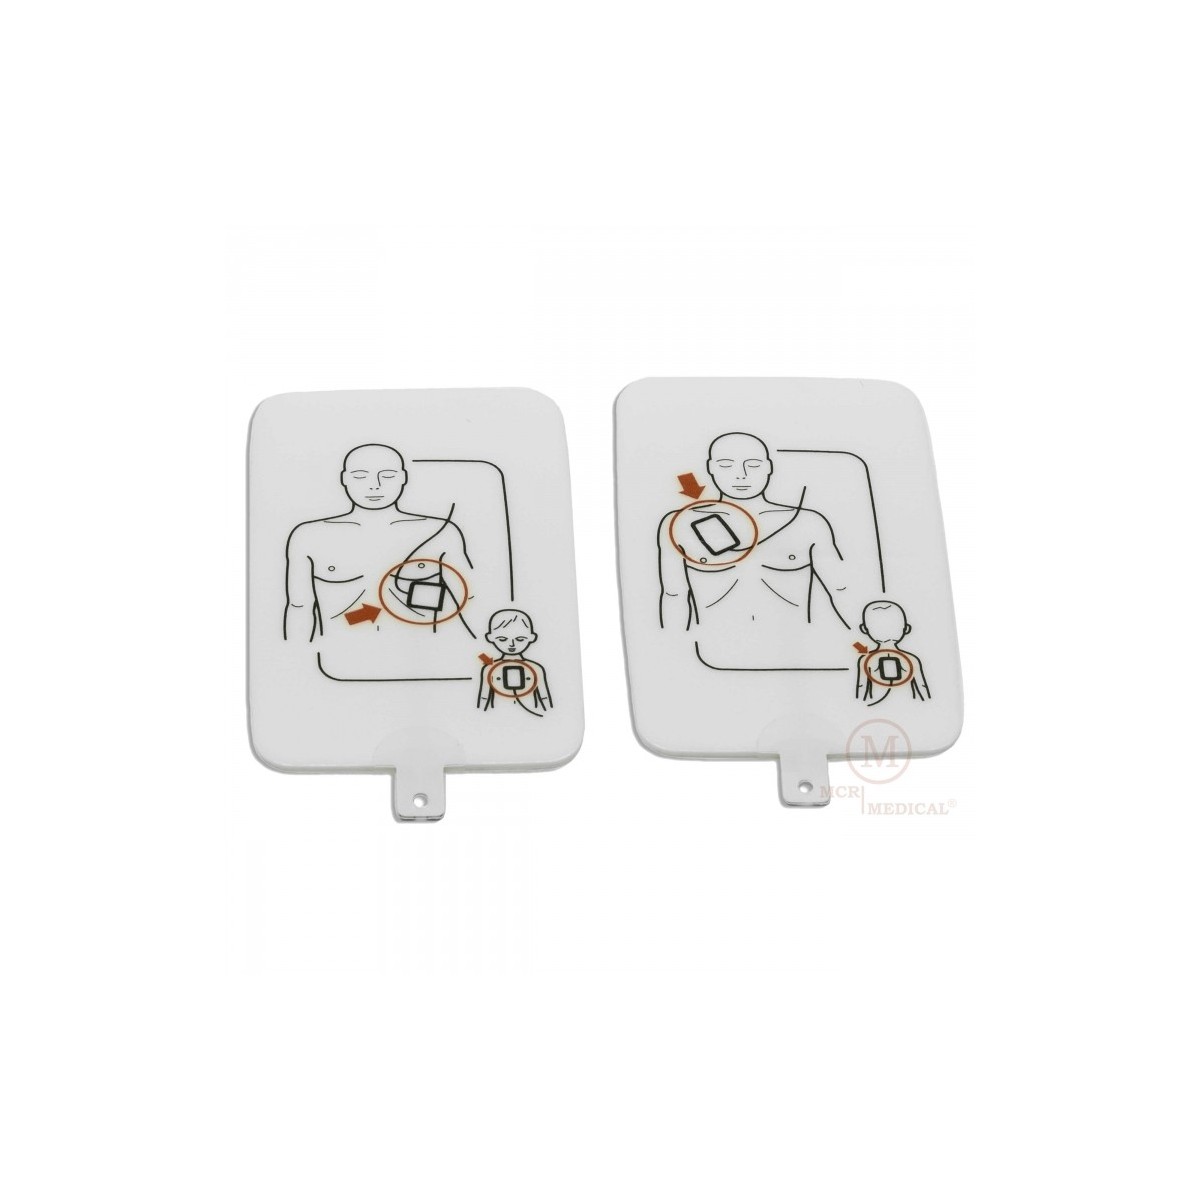 Adult/Child Training Pads for the PRESTAN Professional AED Trainer